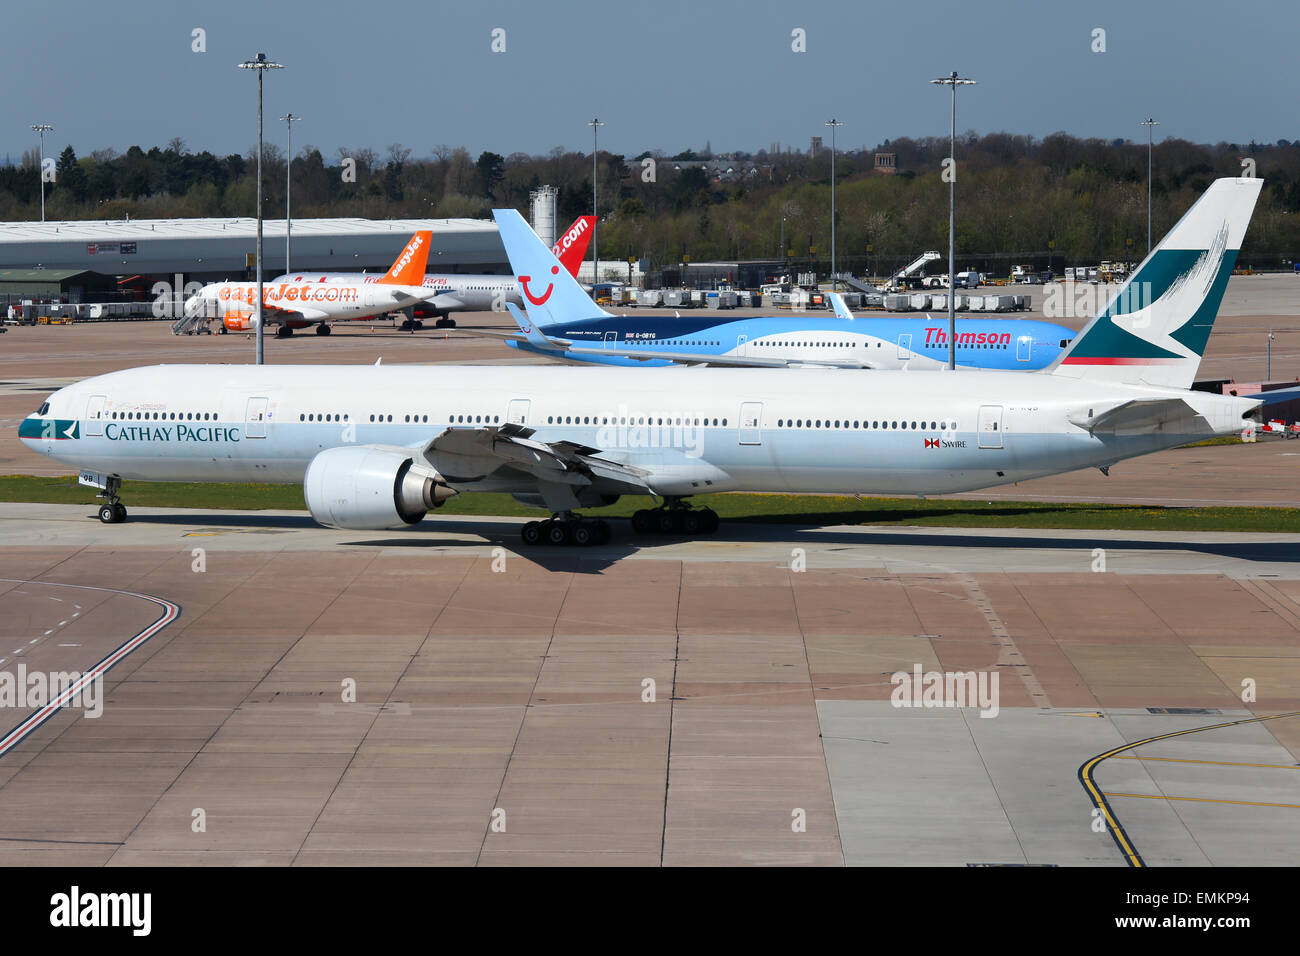 Cathay Pacific Boeing 777-300 taxis to the active runway at Manchester airport. Stock Photo